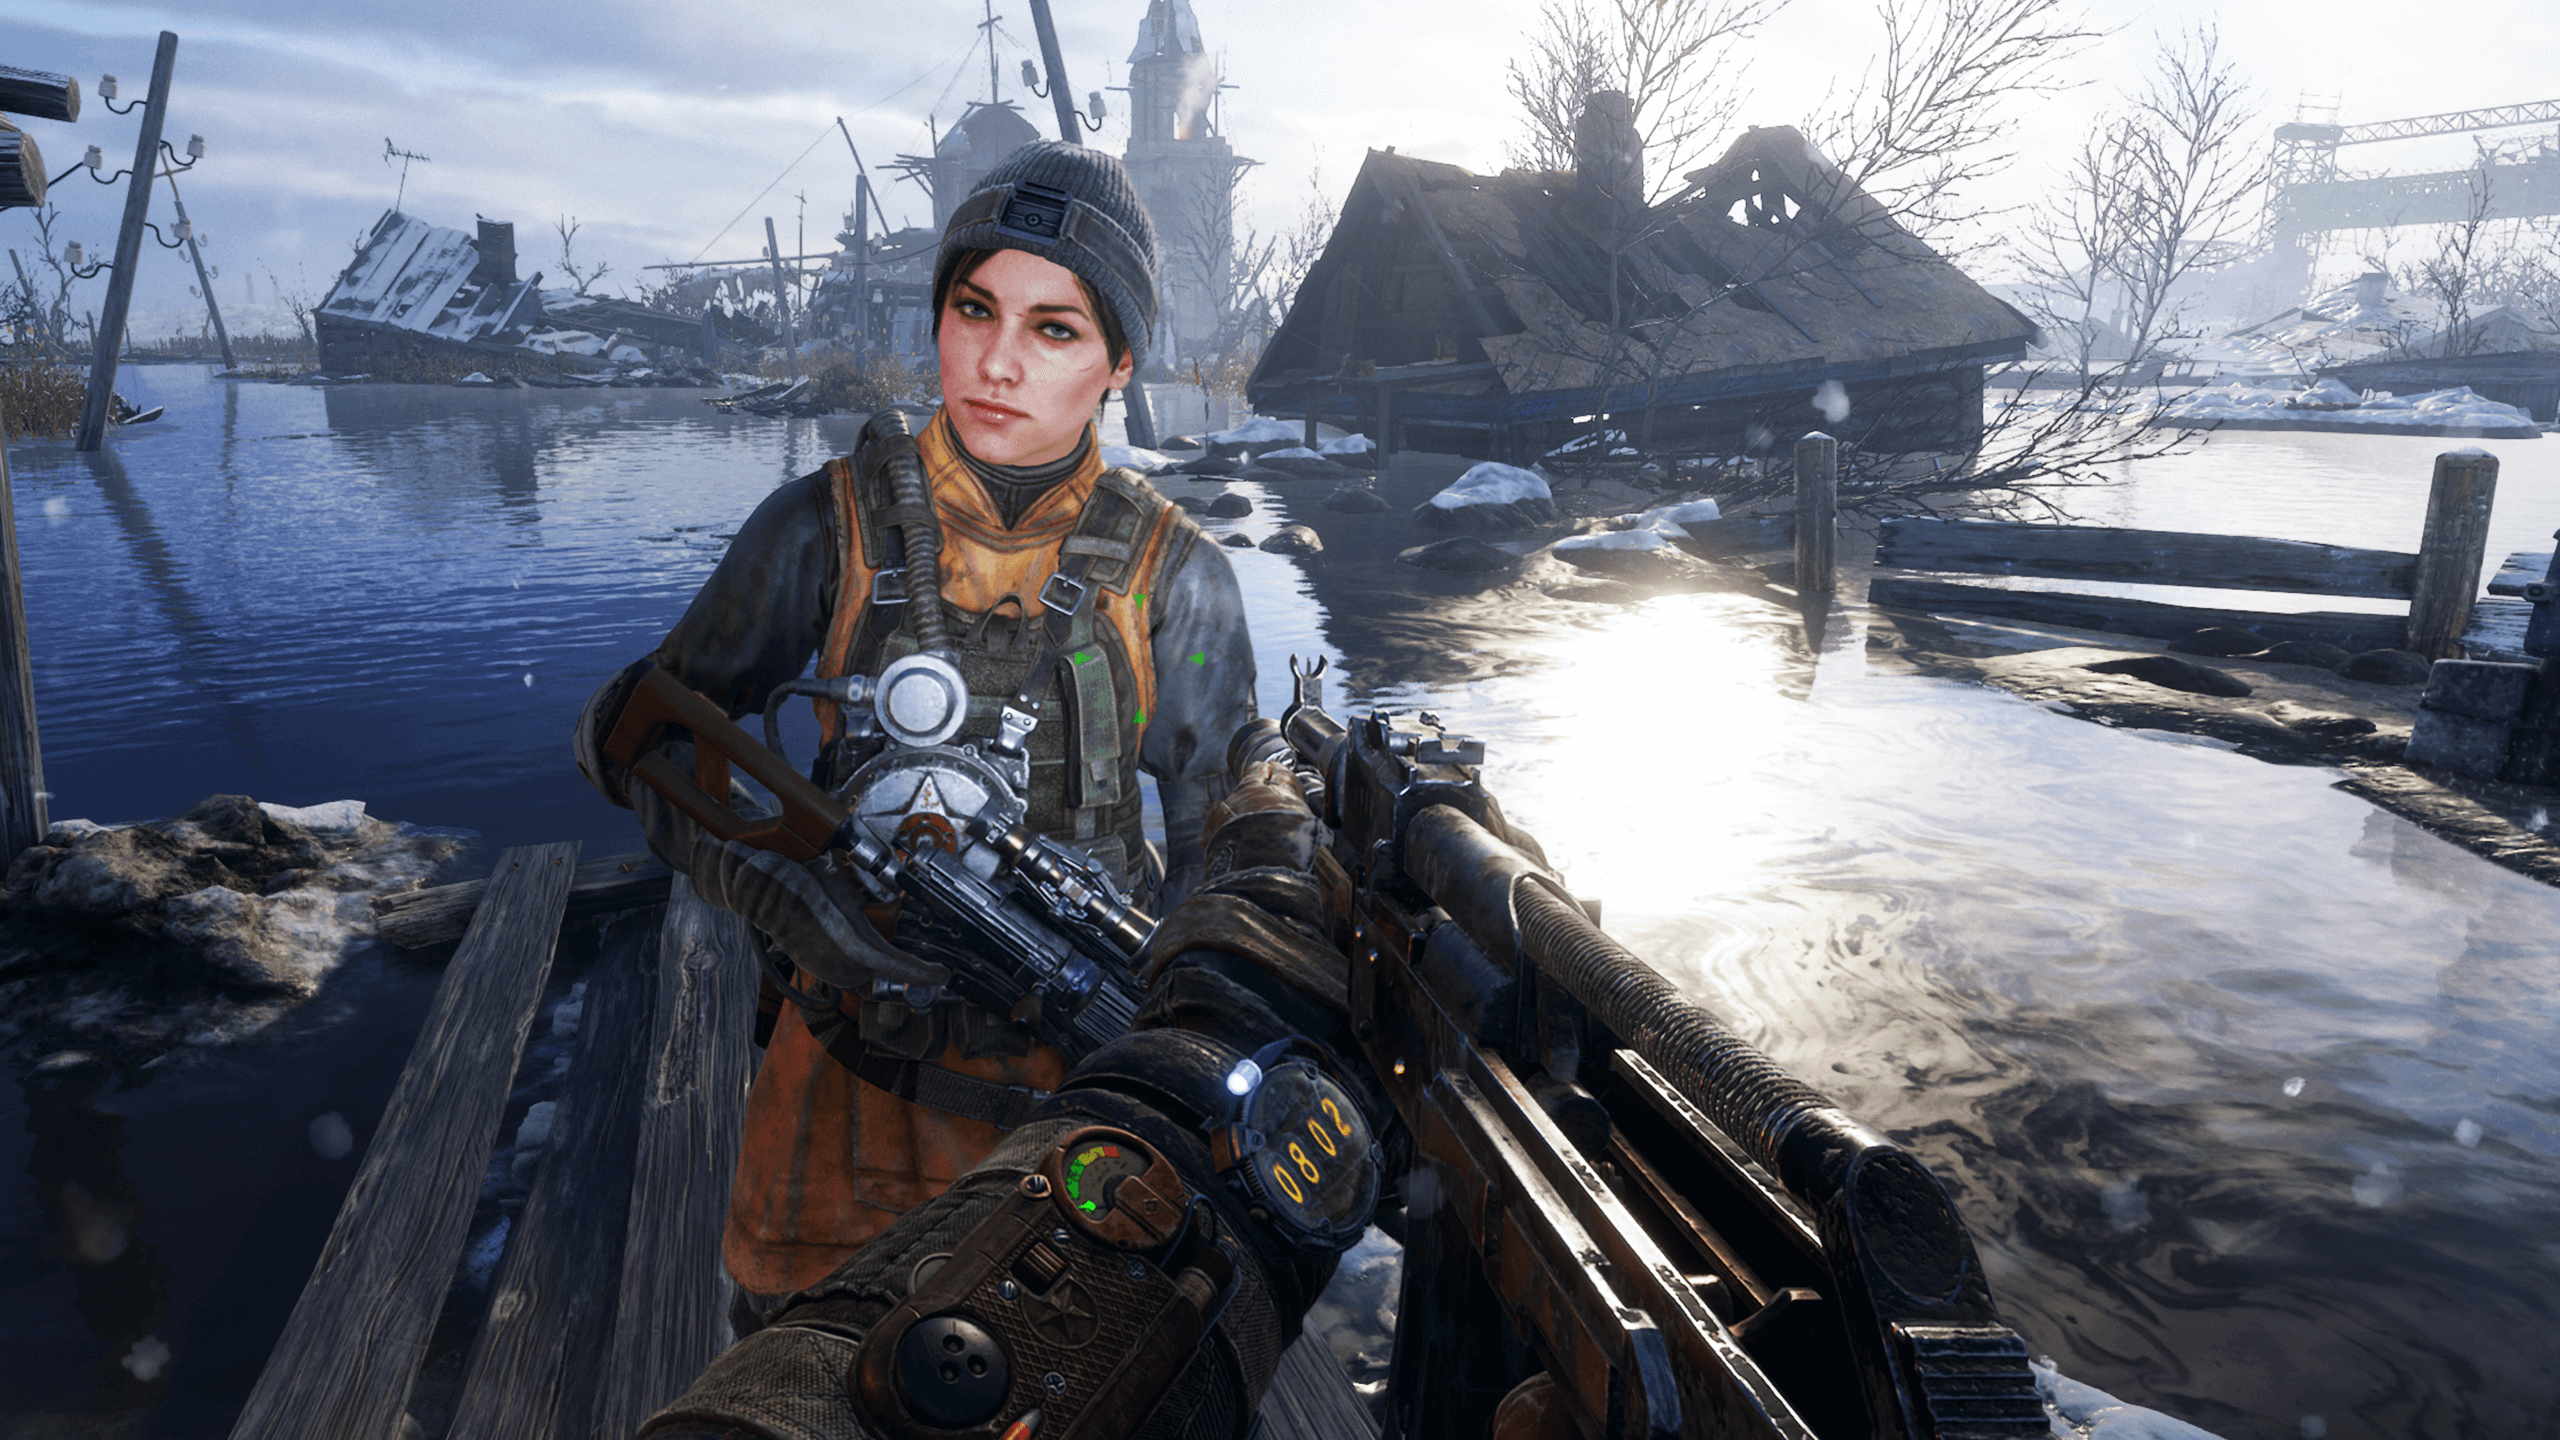 A woman stands on a raft in floodwaters in this Metro Exodus screenshot.